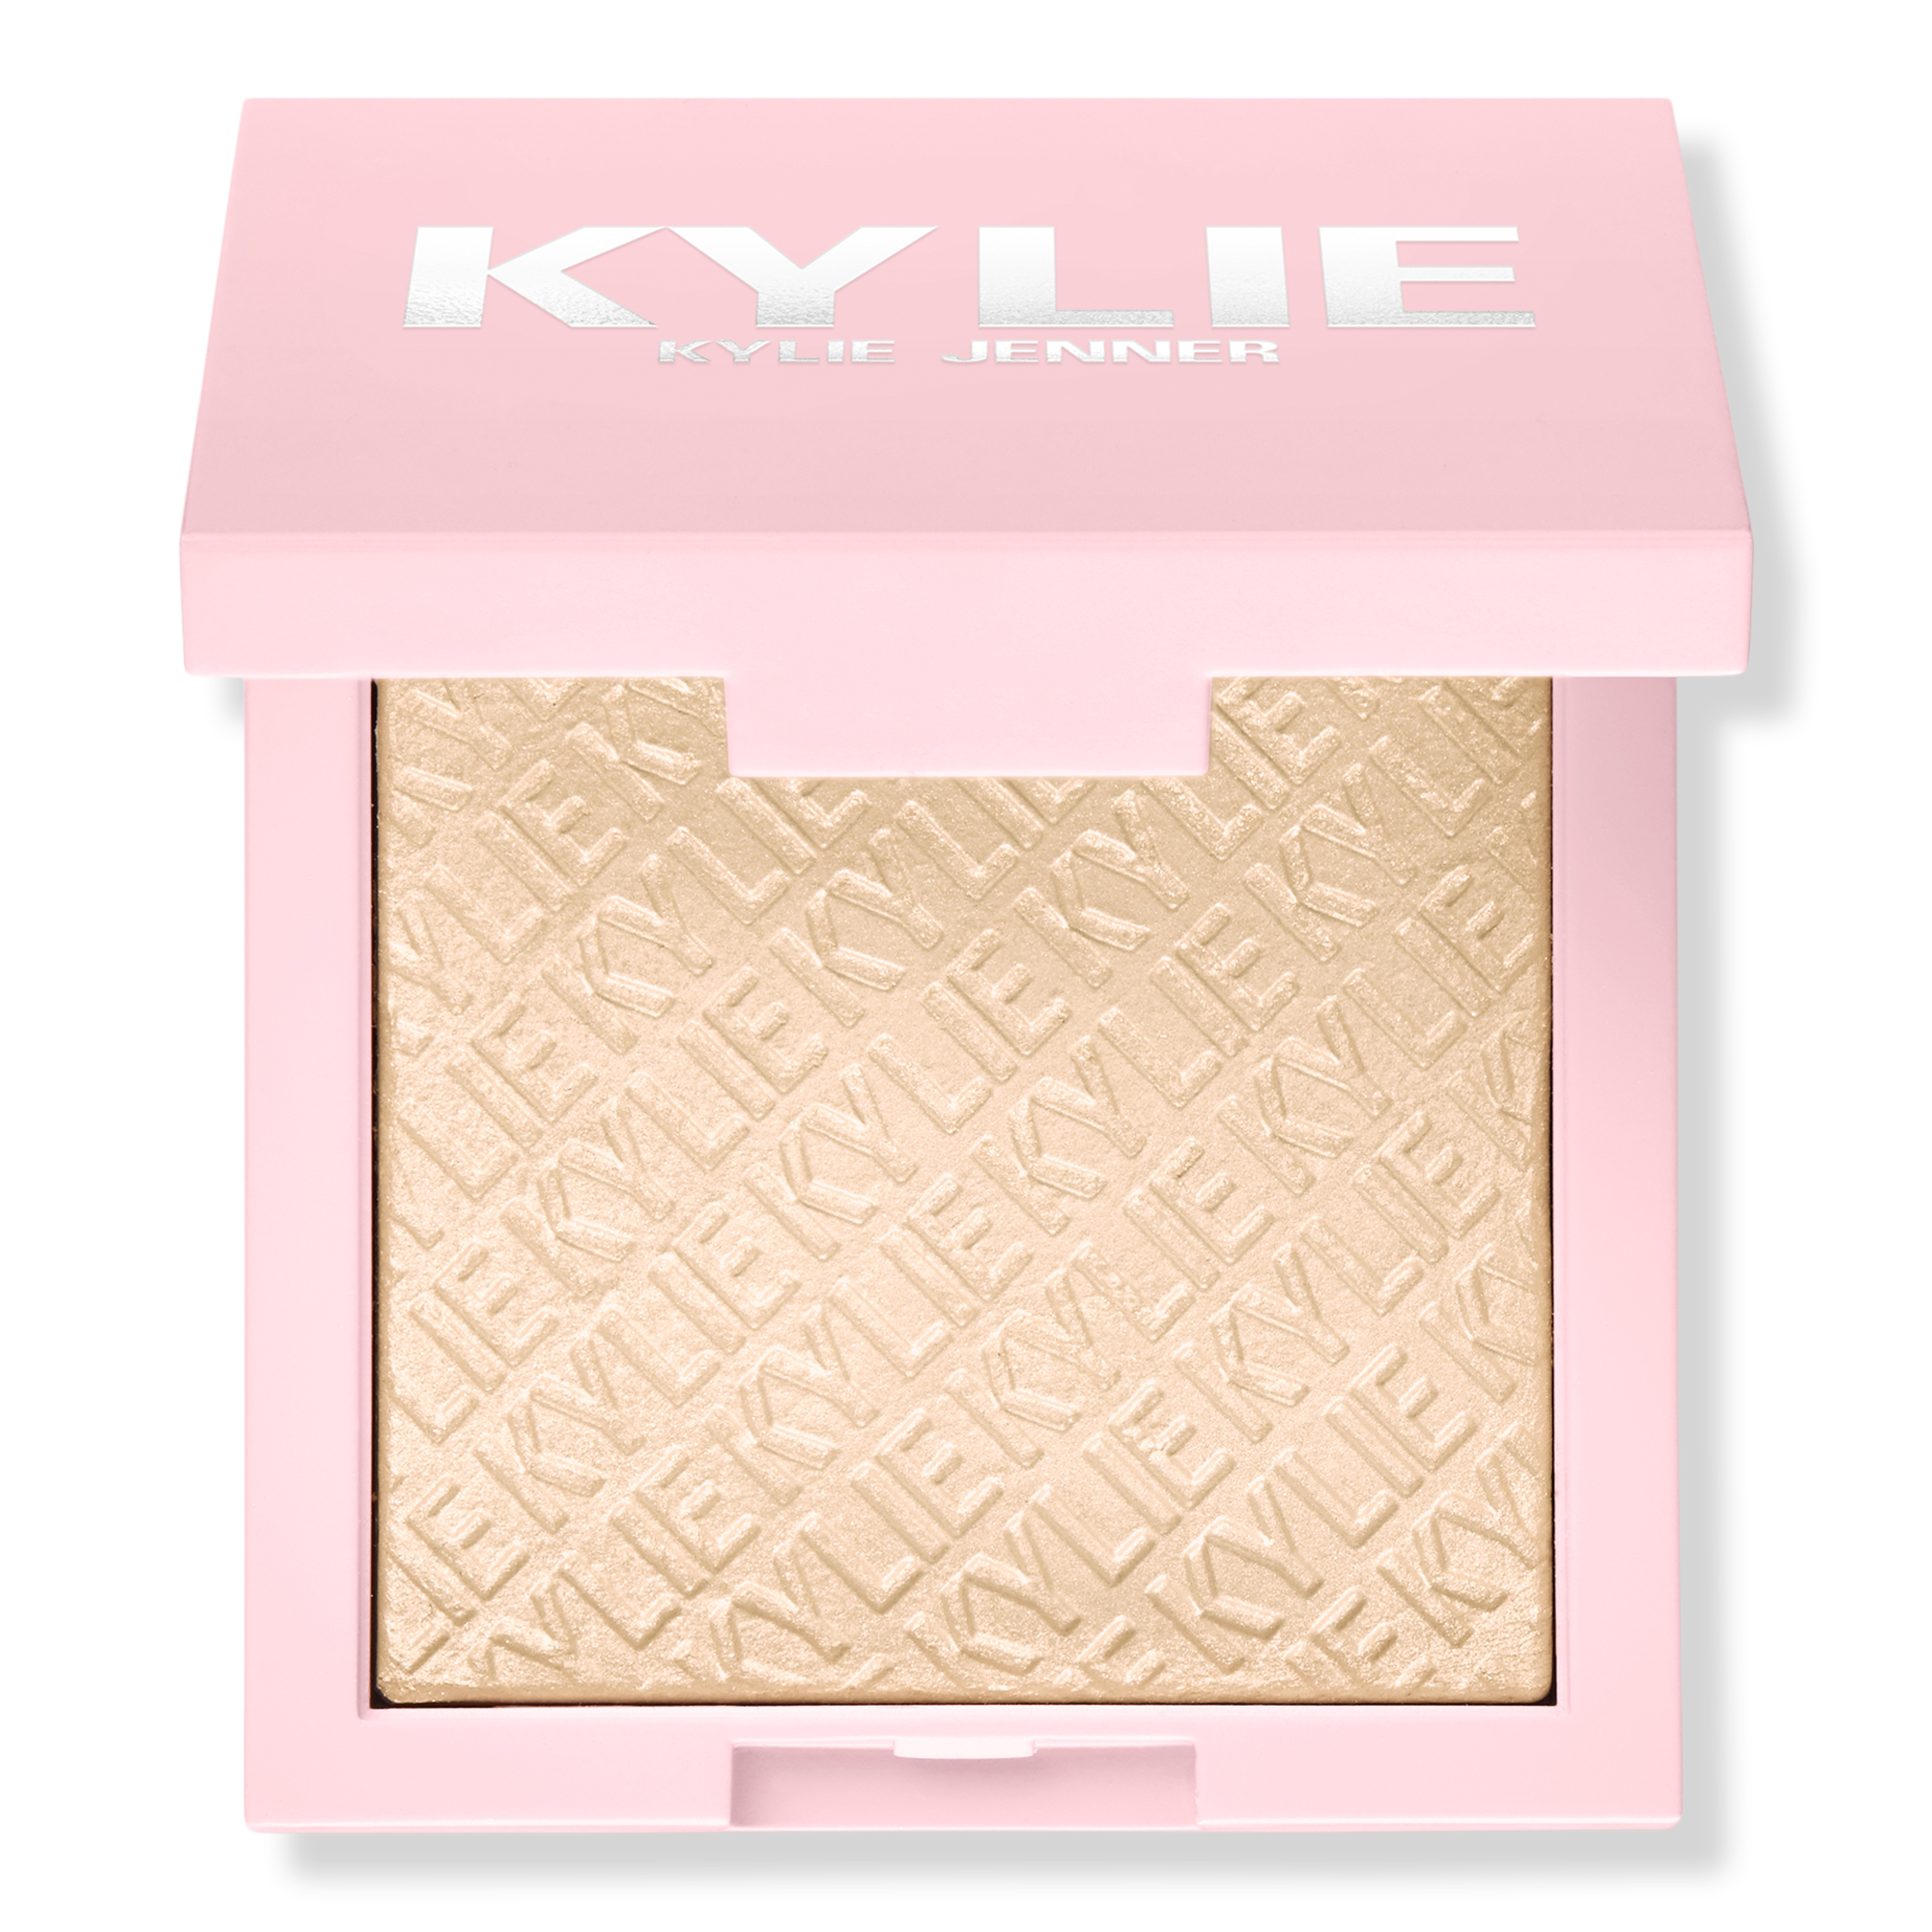 KYLIE COSMETICS | Kylighter - 020 Ice Me Out